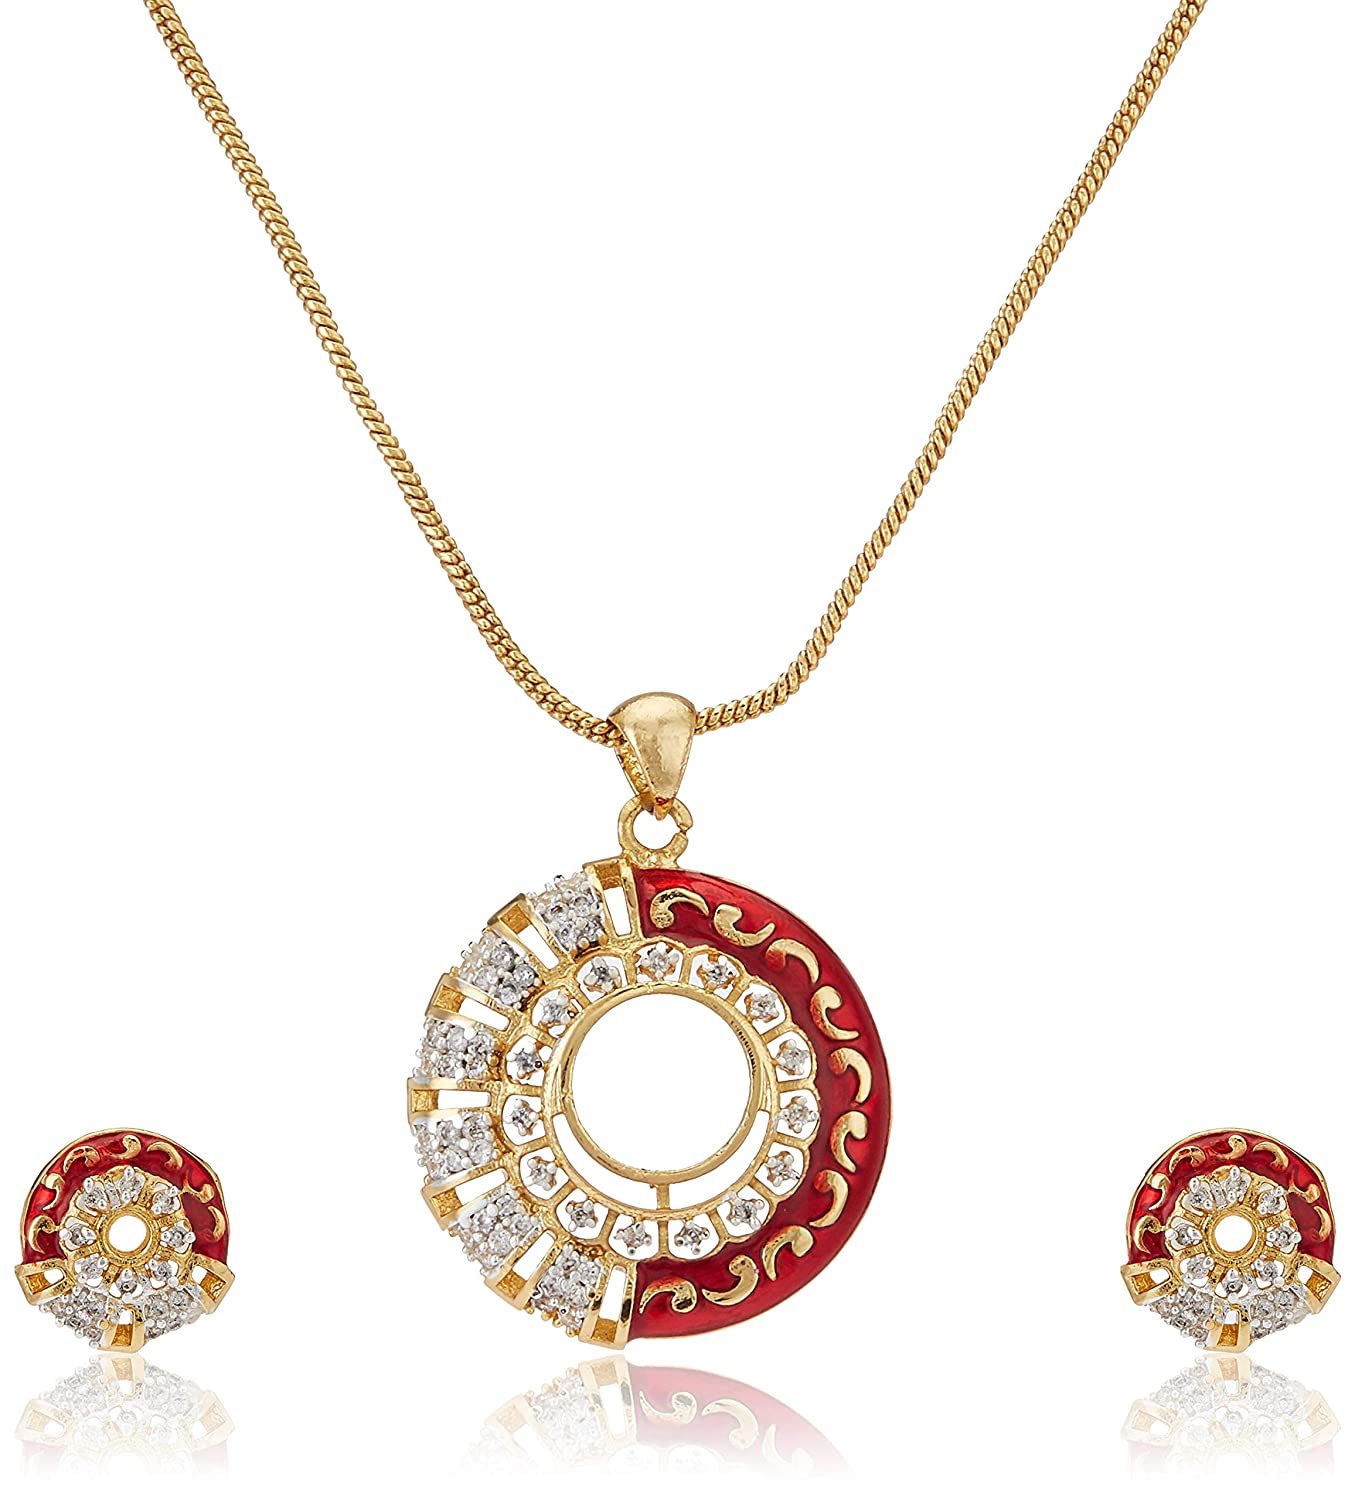 Estele 24 Kt Gold Plated Trendy and Fancy Fashion Jewellery Design Necklace Set for Women